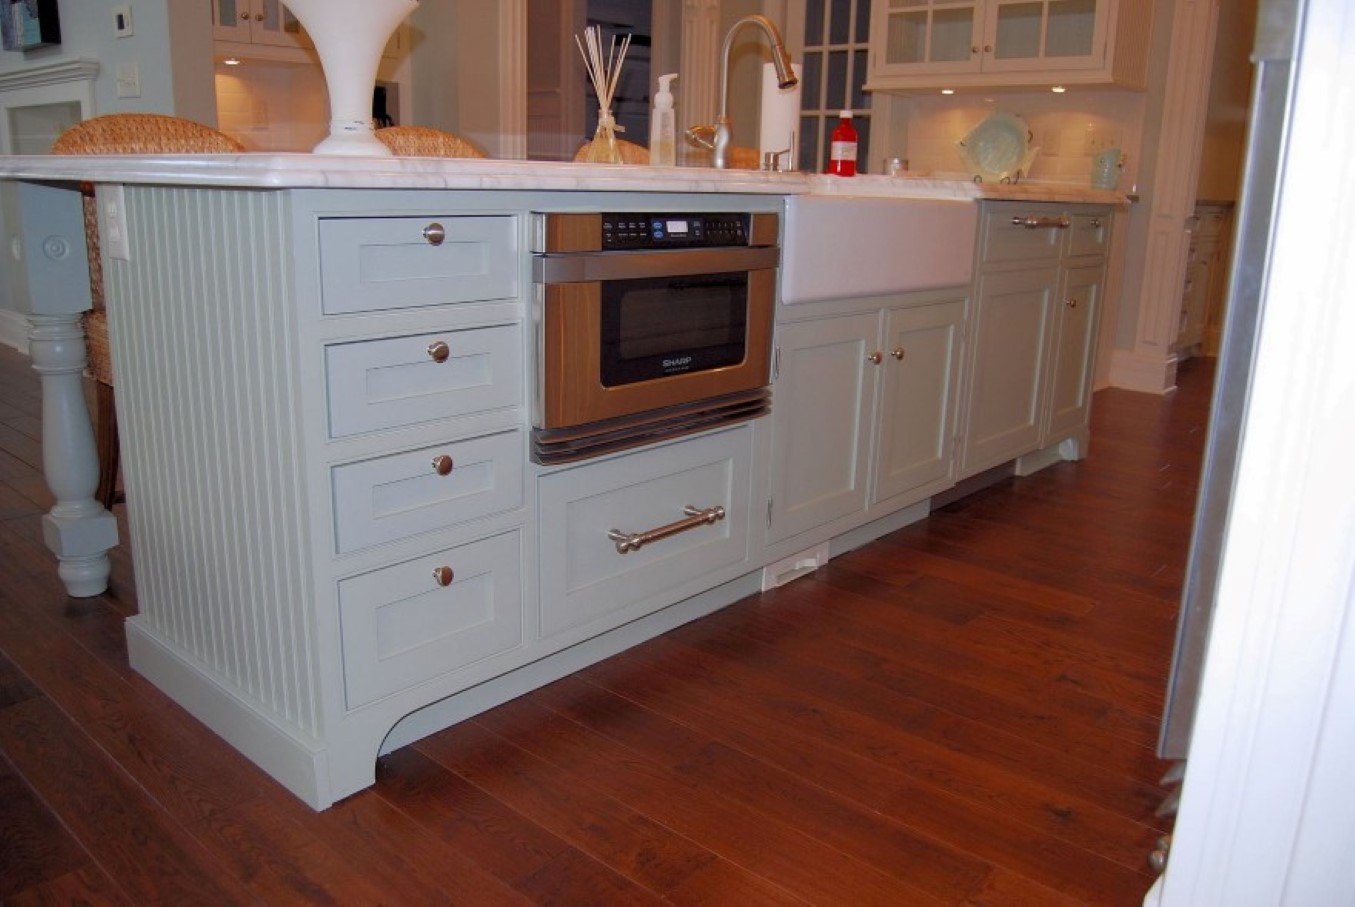 Farmhouse Sink Wood Pretty Farmhouse Sink Plus Red Wood Floor Color Idea Also Under Counter Microwave And Nice Blue Wall Paint Design Kitchen  Interesting Information On Under-Counter Microwave 